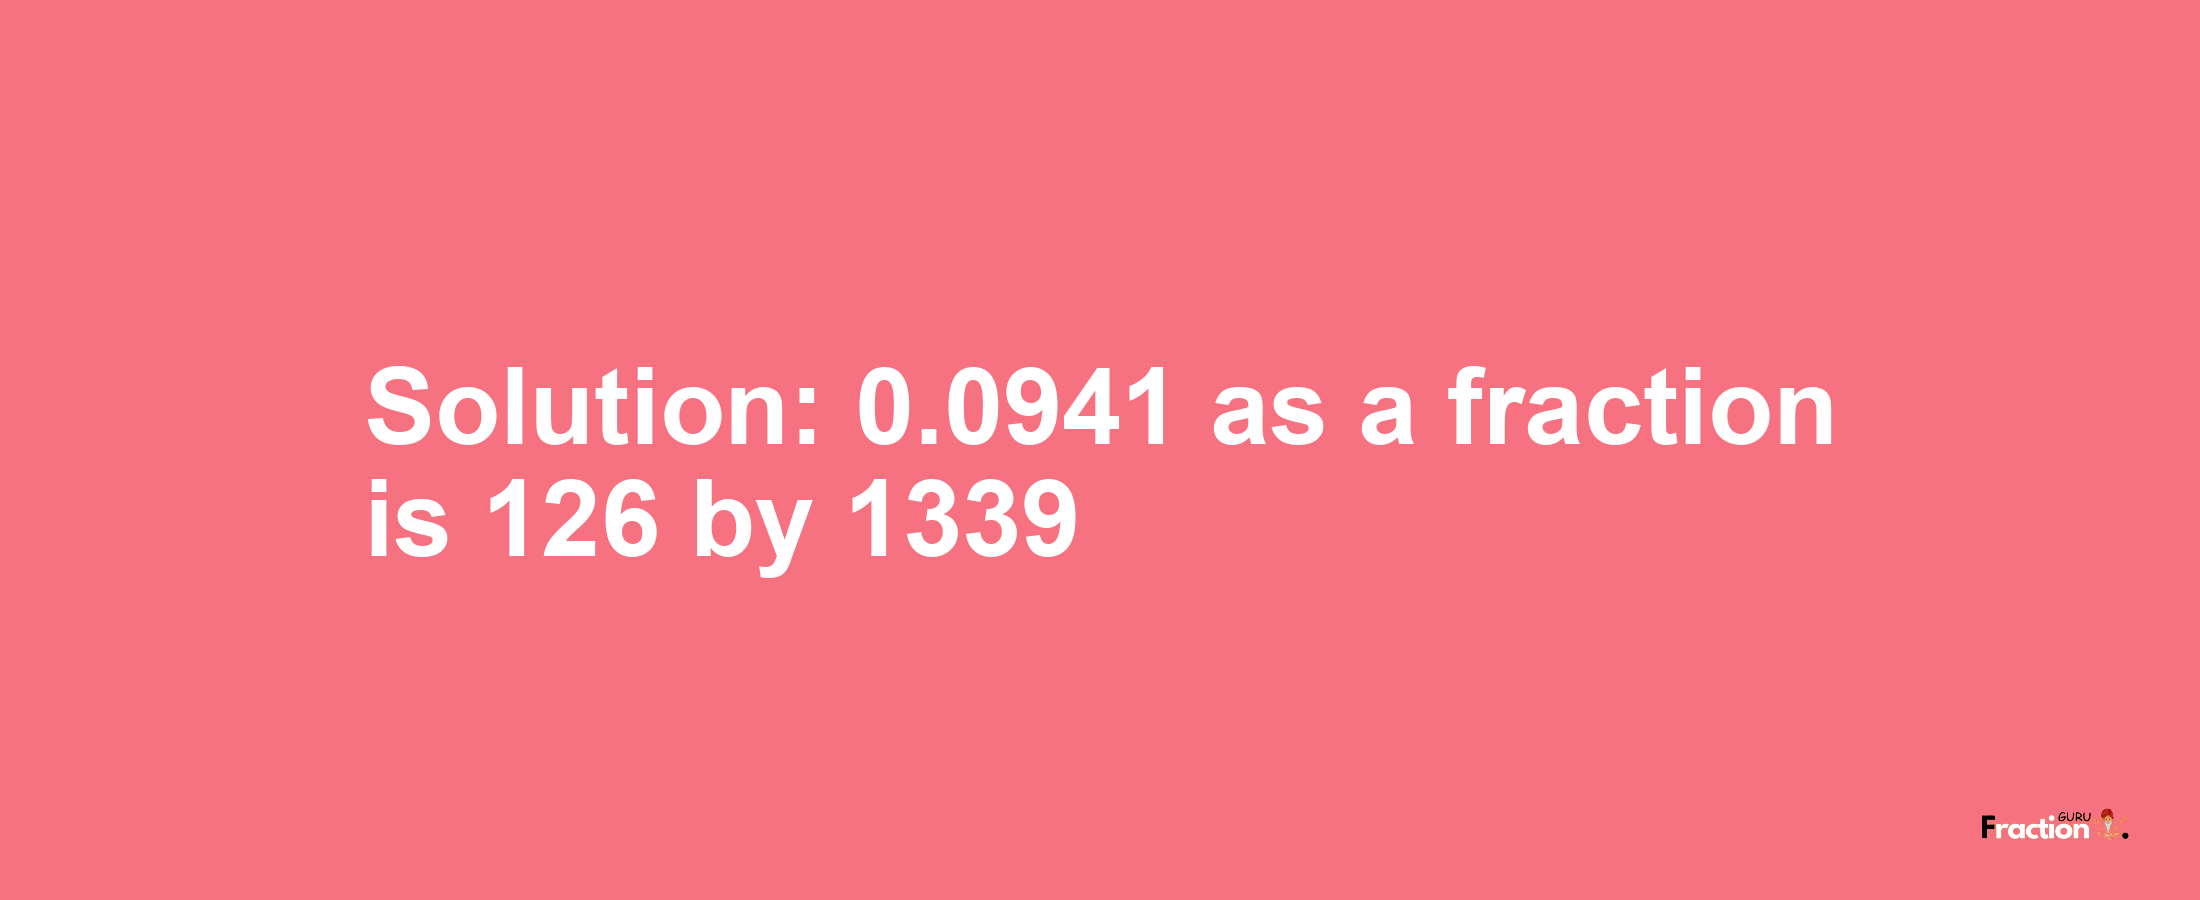 Solution:0.0941 as a fraction is 126/1339